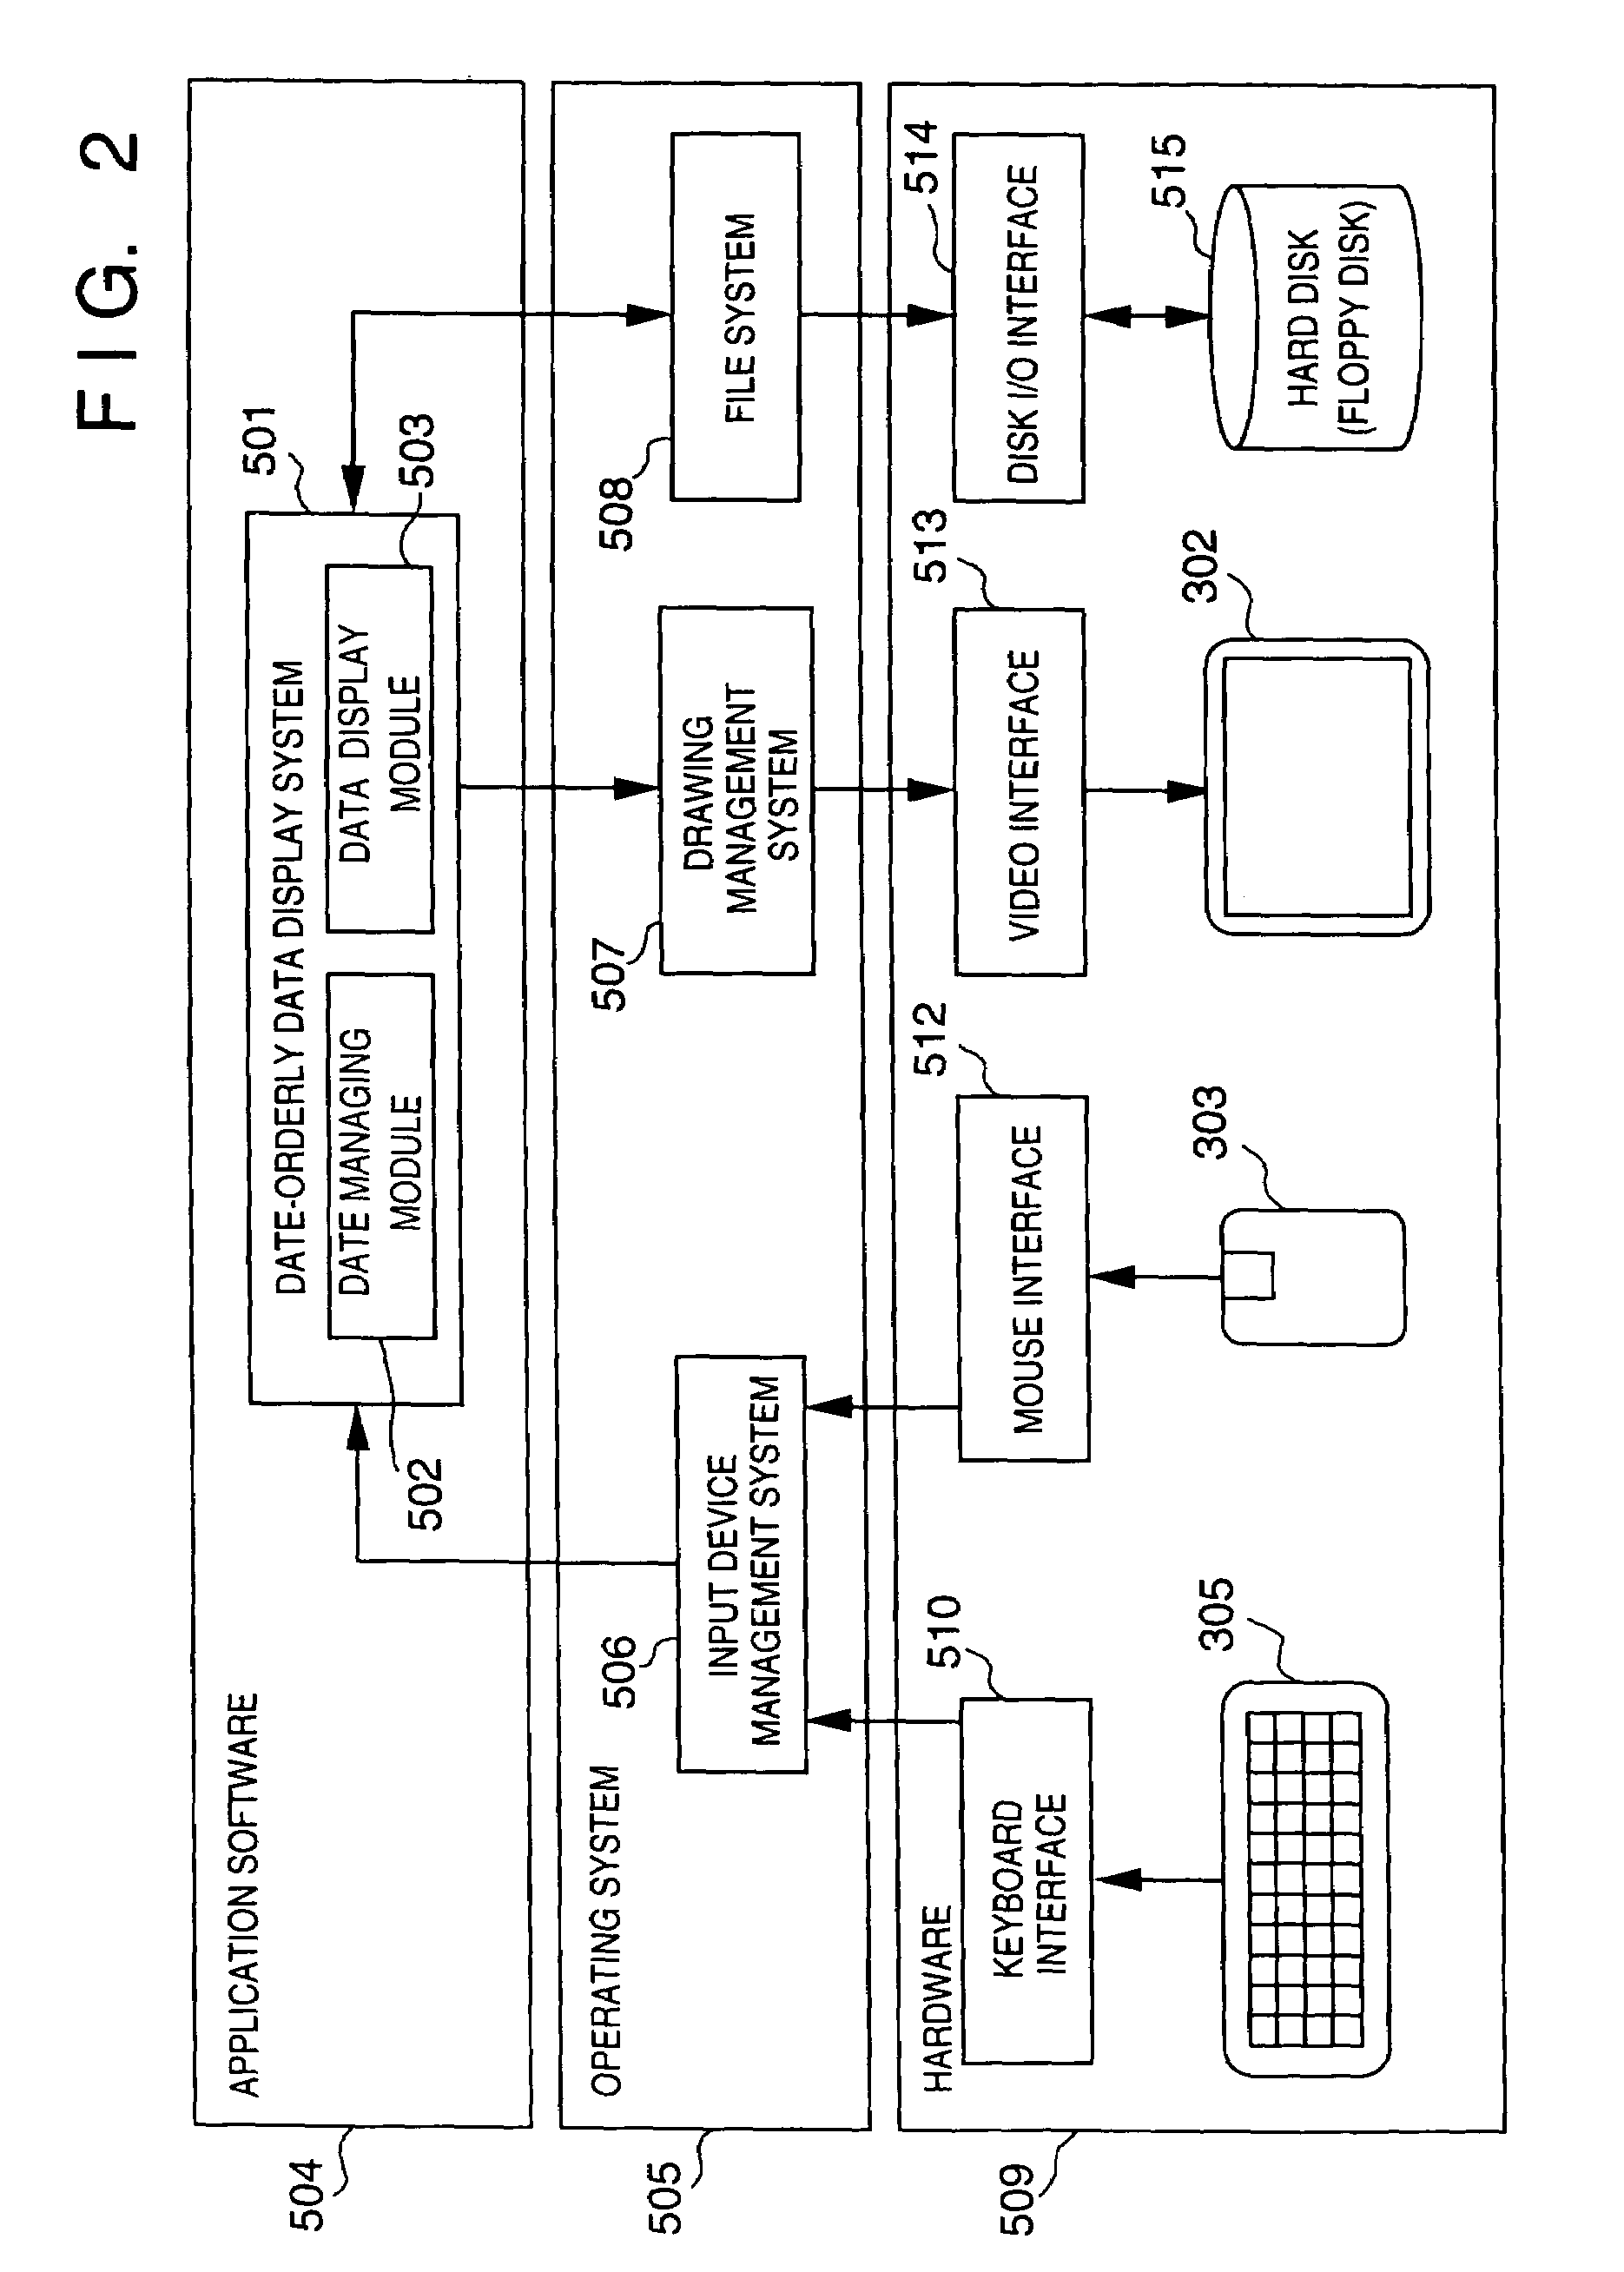 Intuitive hierarchical time-series data display method and system